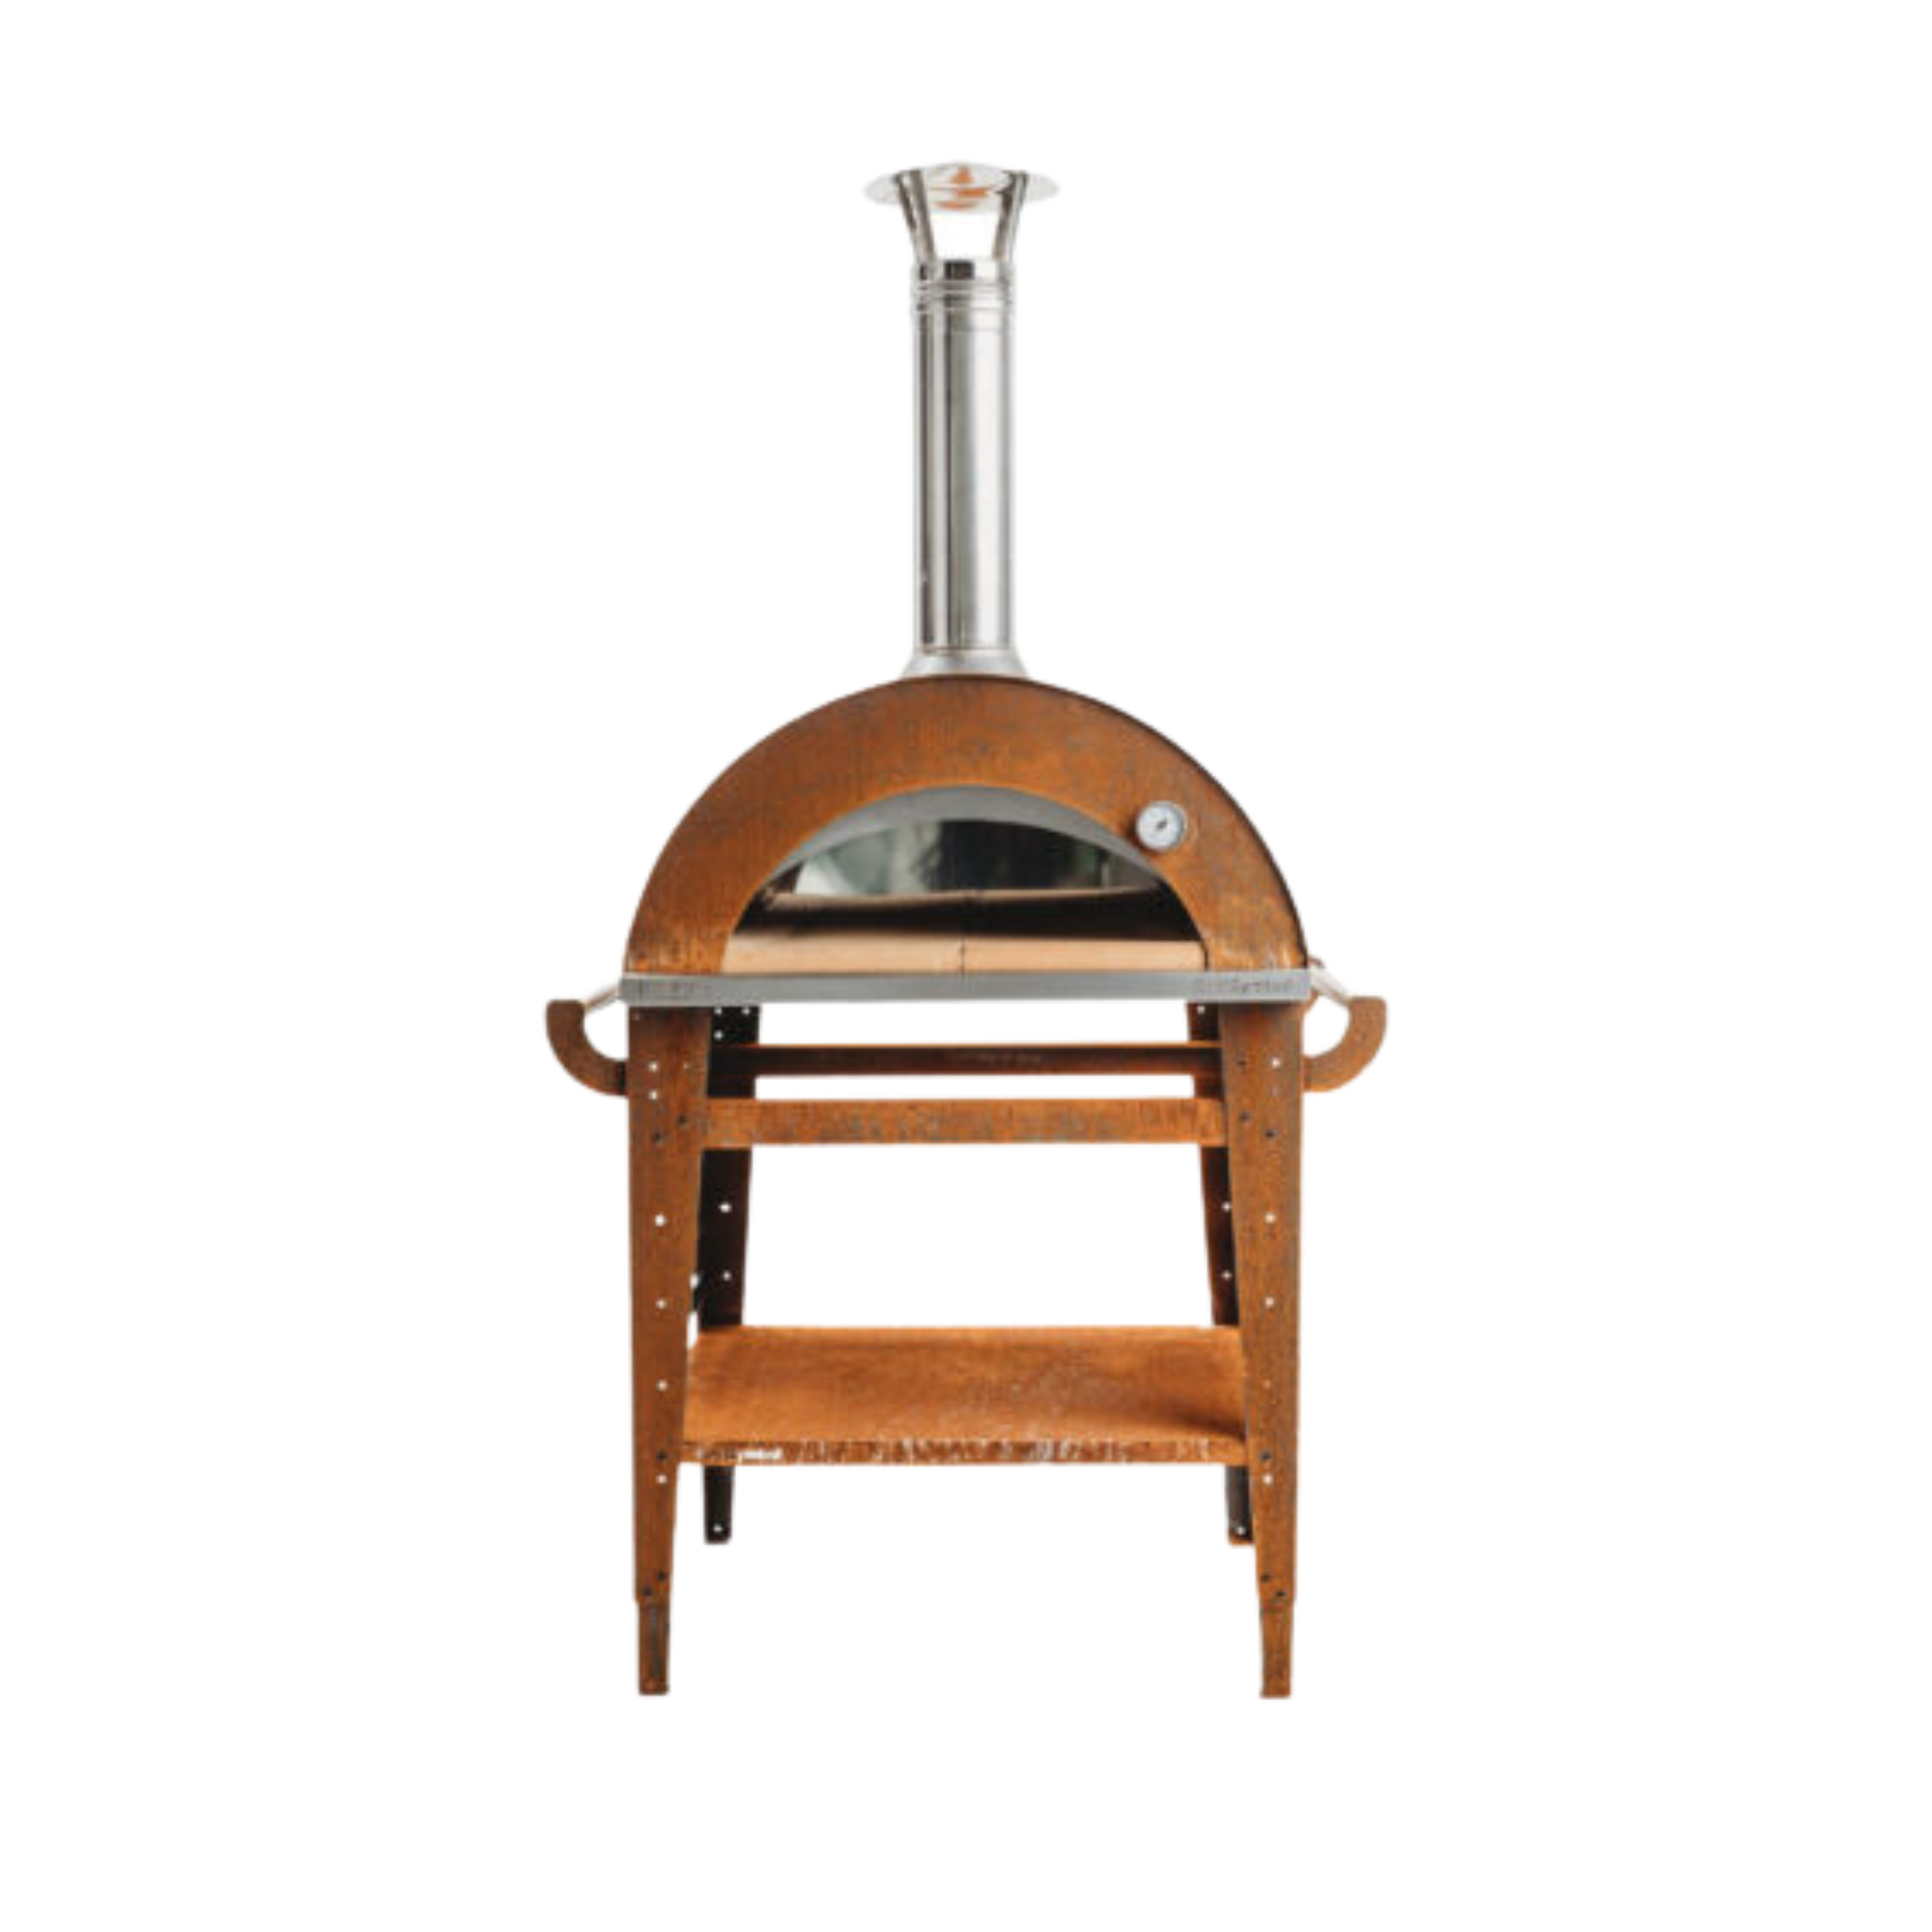 Pizzo-set Wood Fired Pizza Oven with Stand